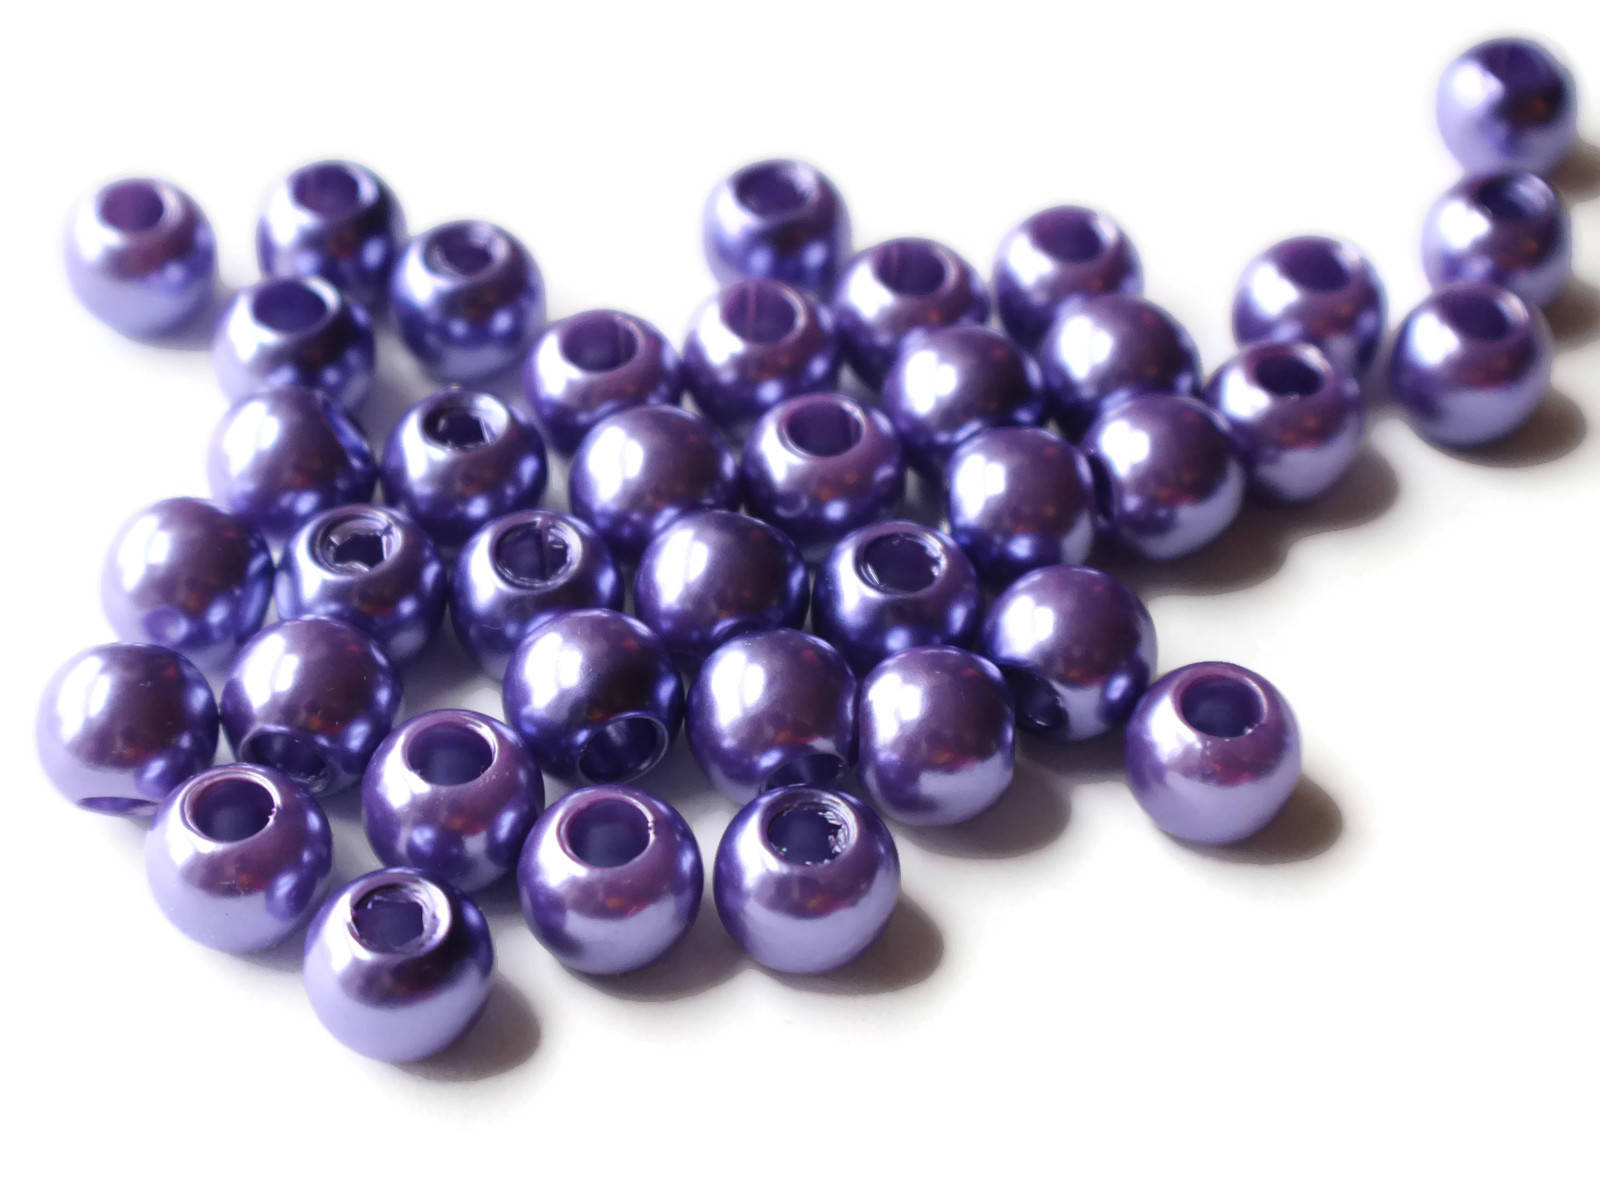 Pearl purple silicone beads • 10 pcs • 15 mm • 12 mm • silicone round beads  • metallic purple color • loose sensory beads • wholesale